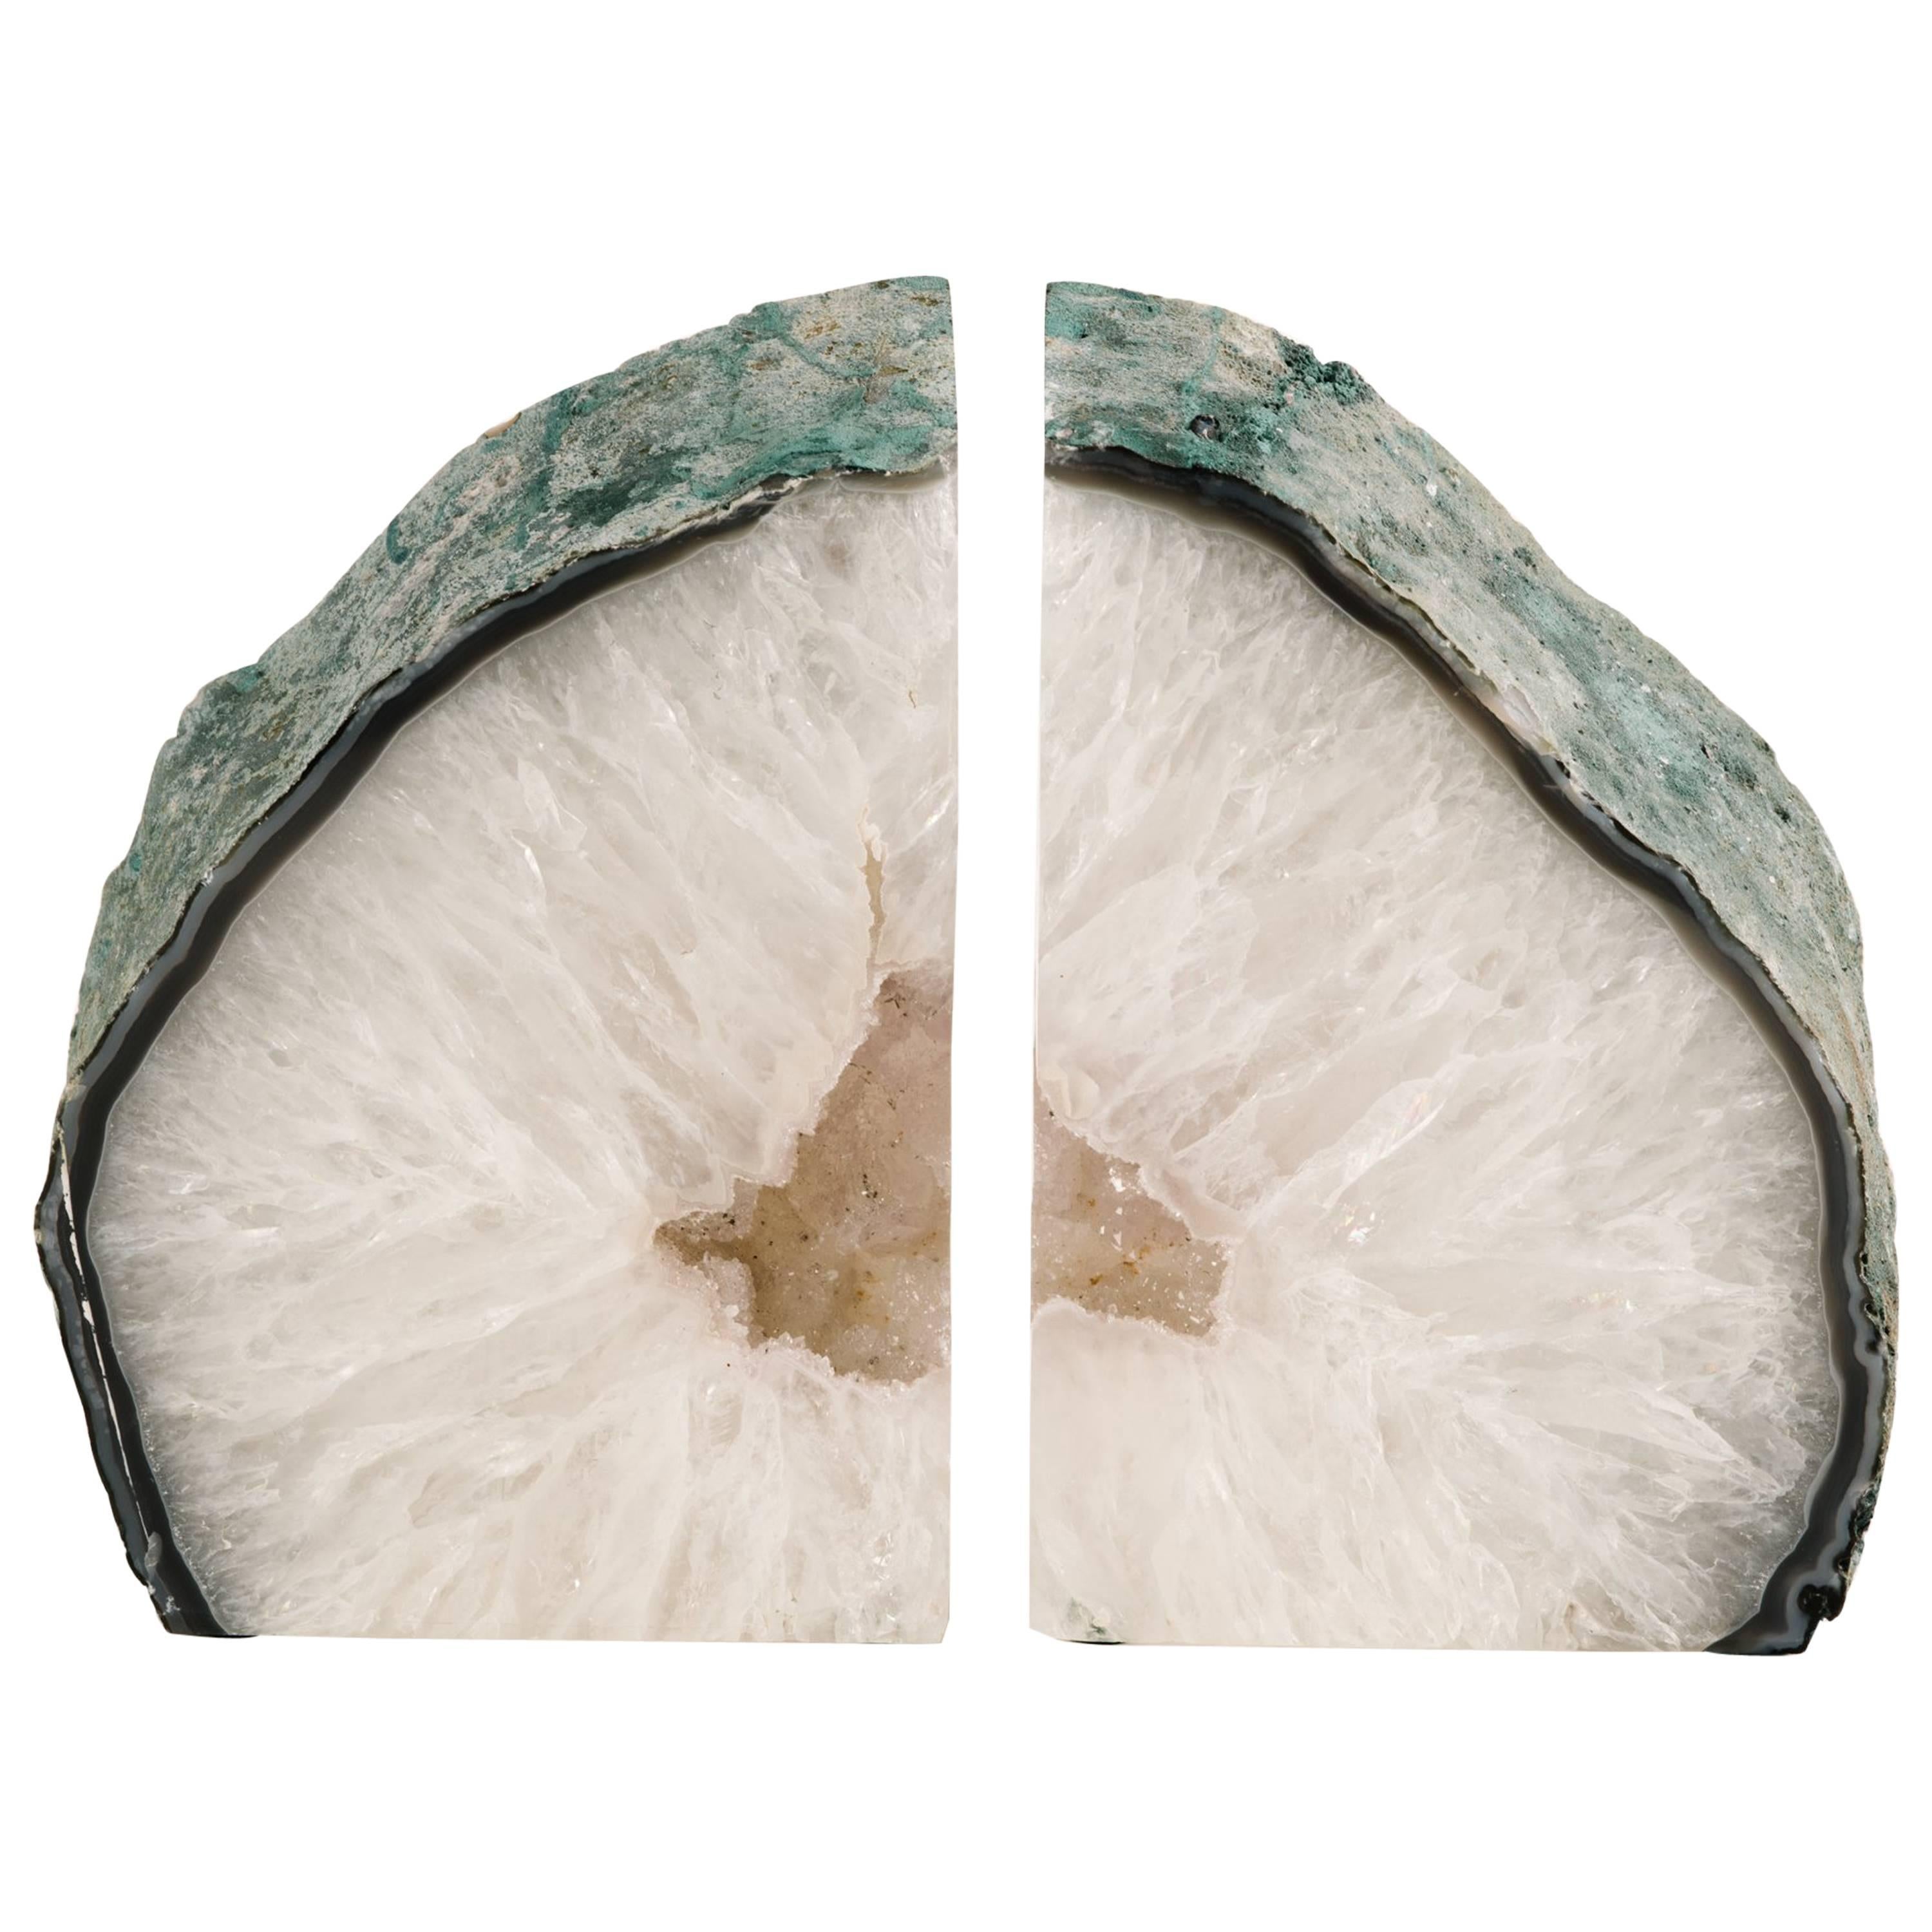 Pair of Chunky Quartz Crystal Bookends with Oxidized Green Edges